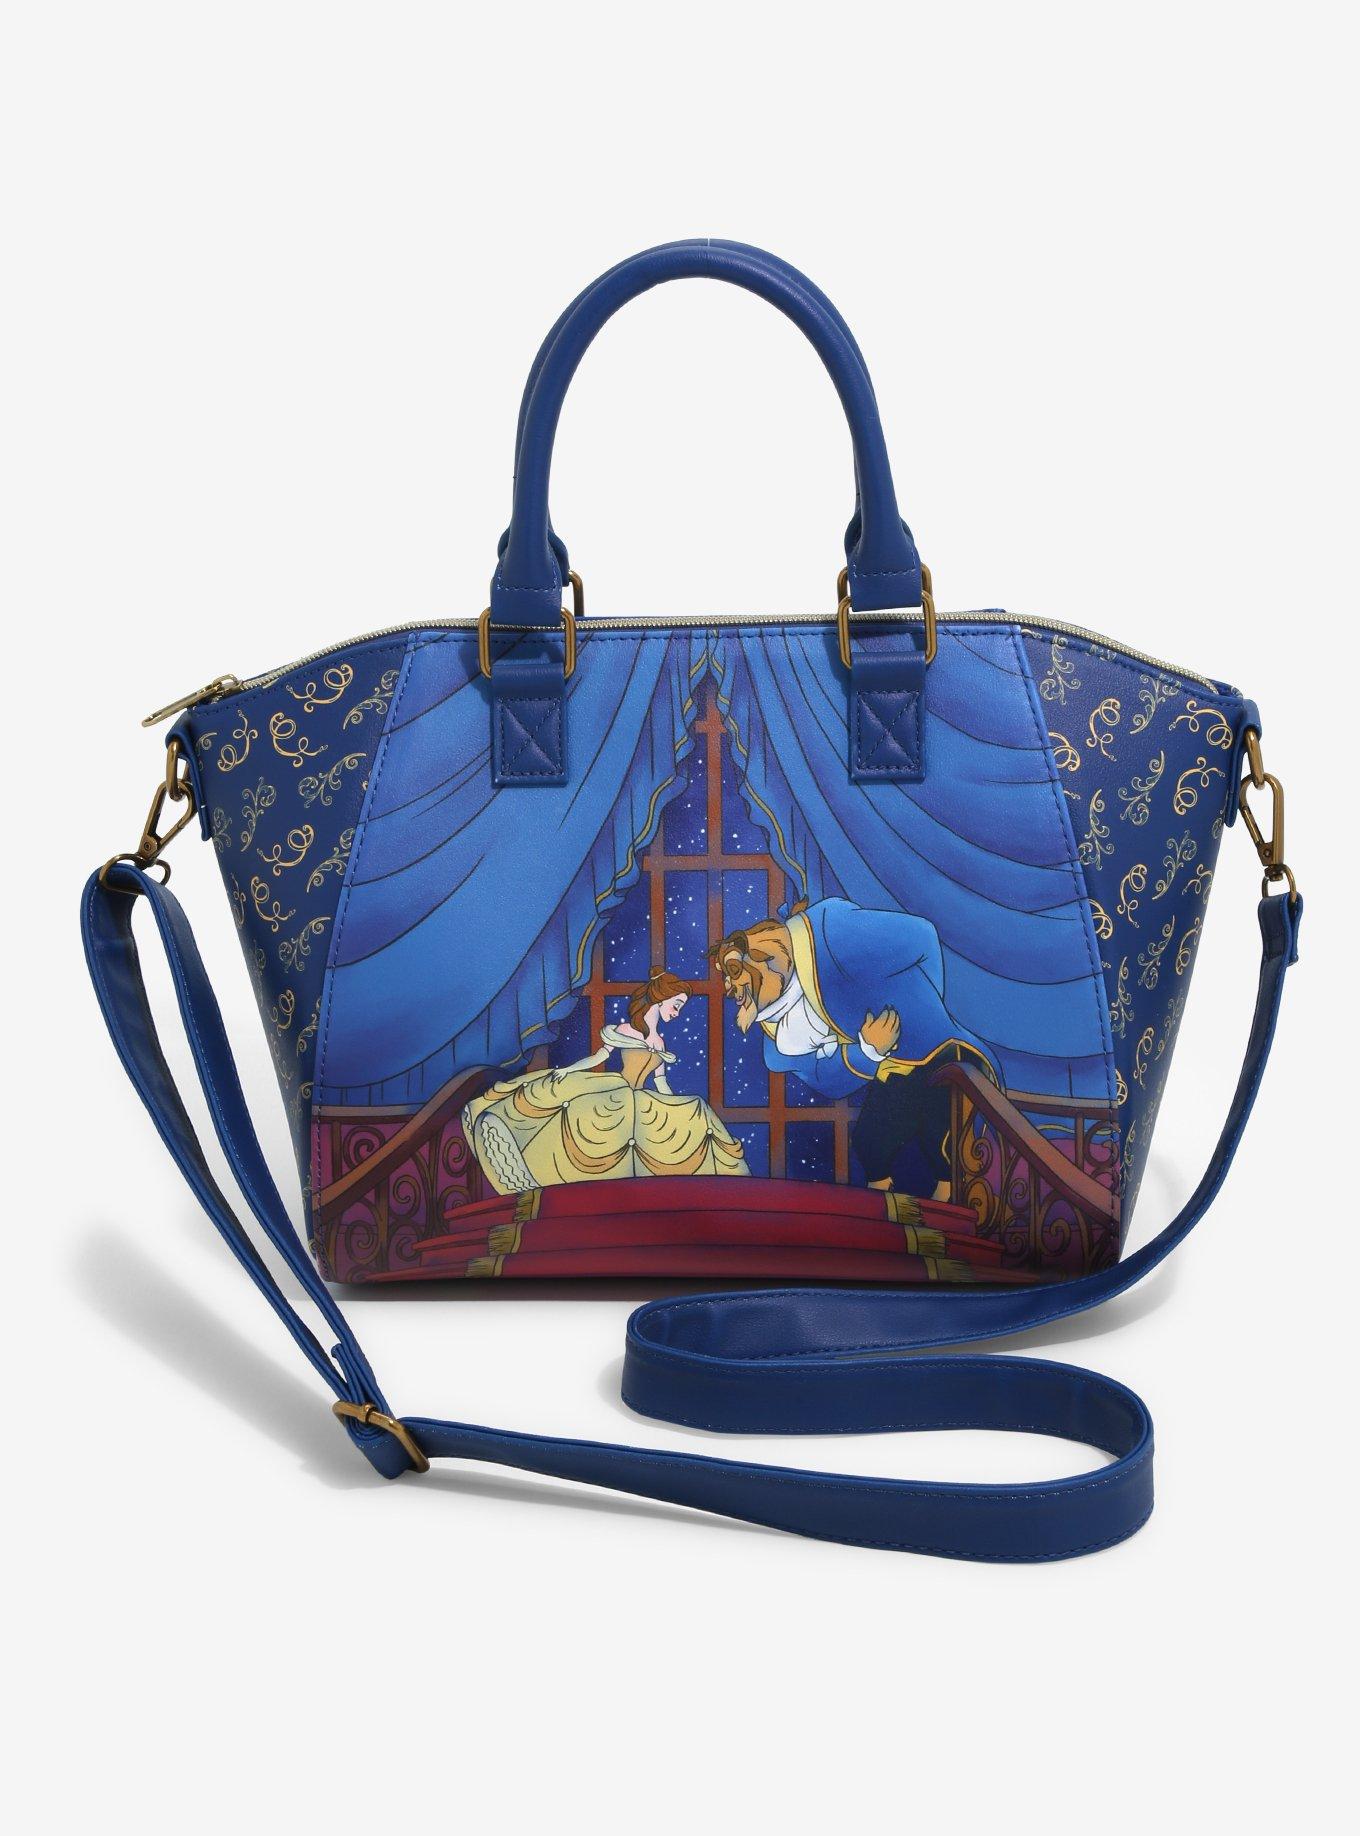 Loungefly Disney Beauty And The Beast Staircase Satchel Bag